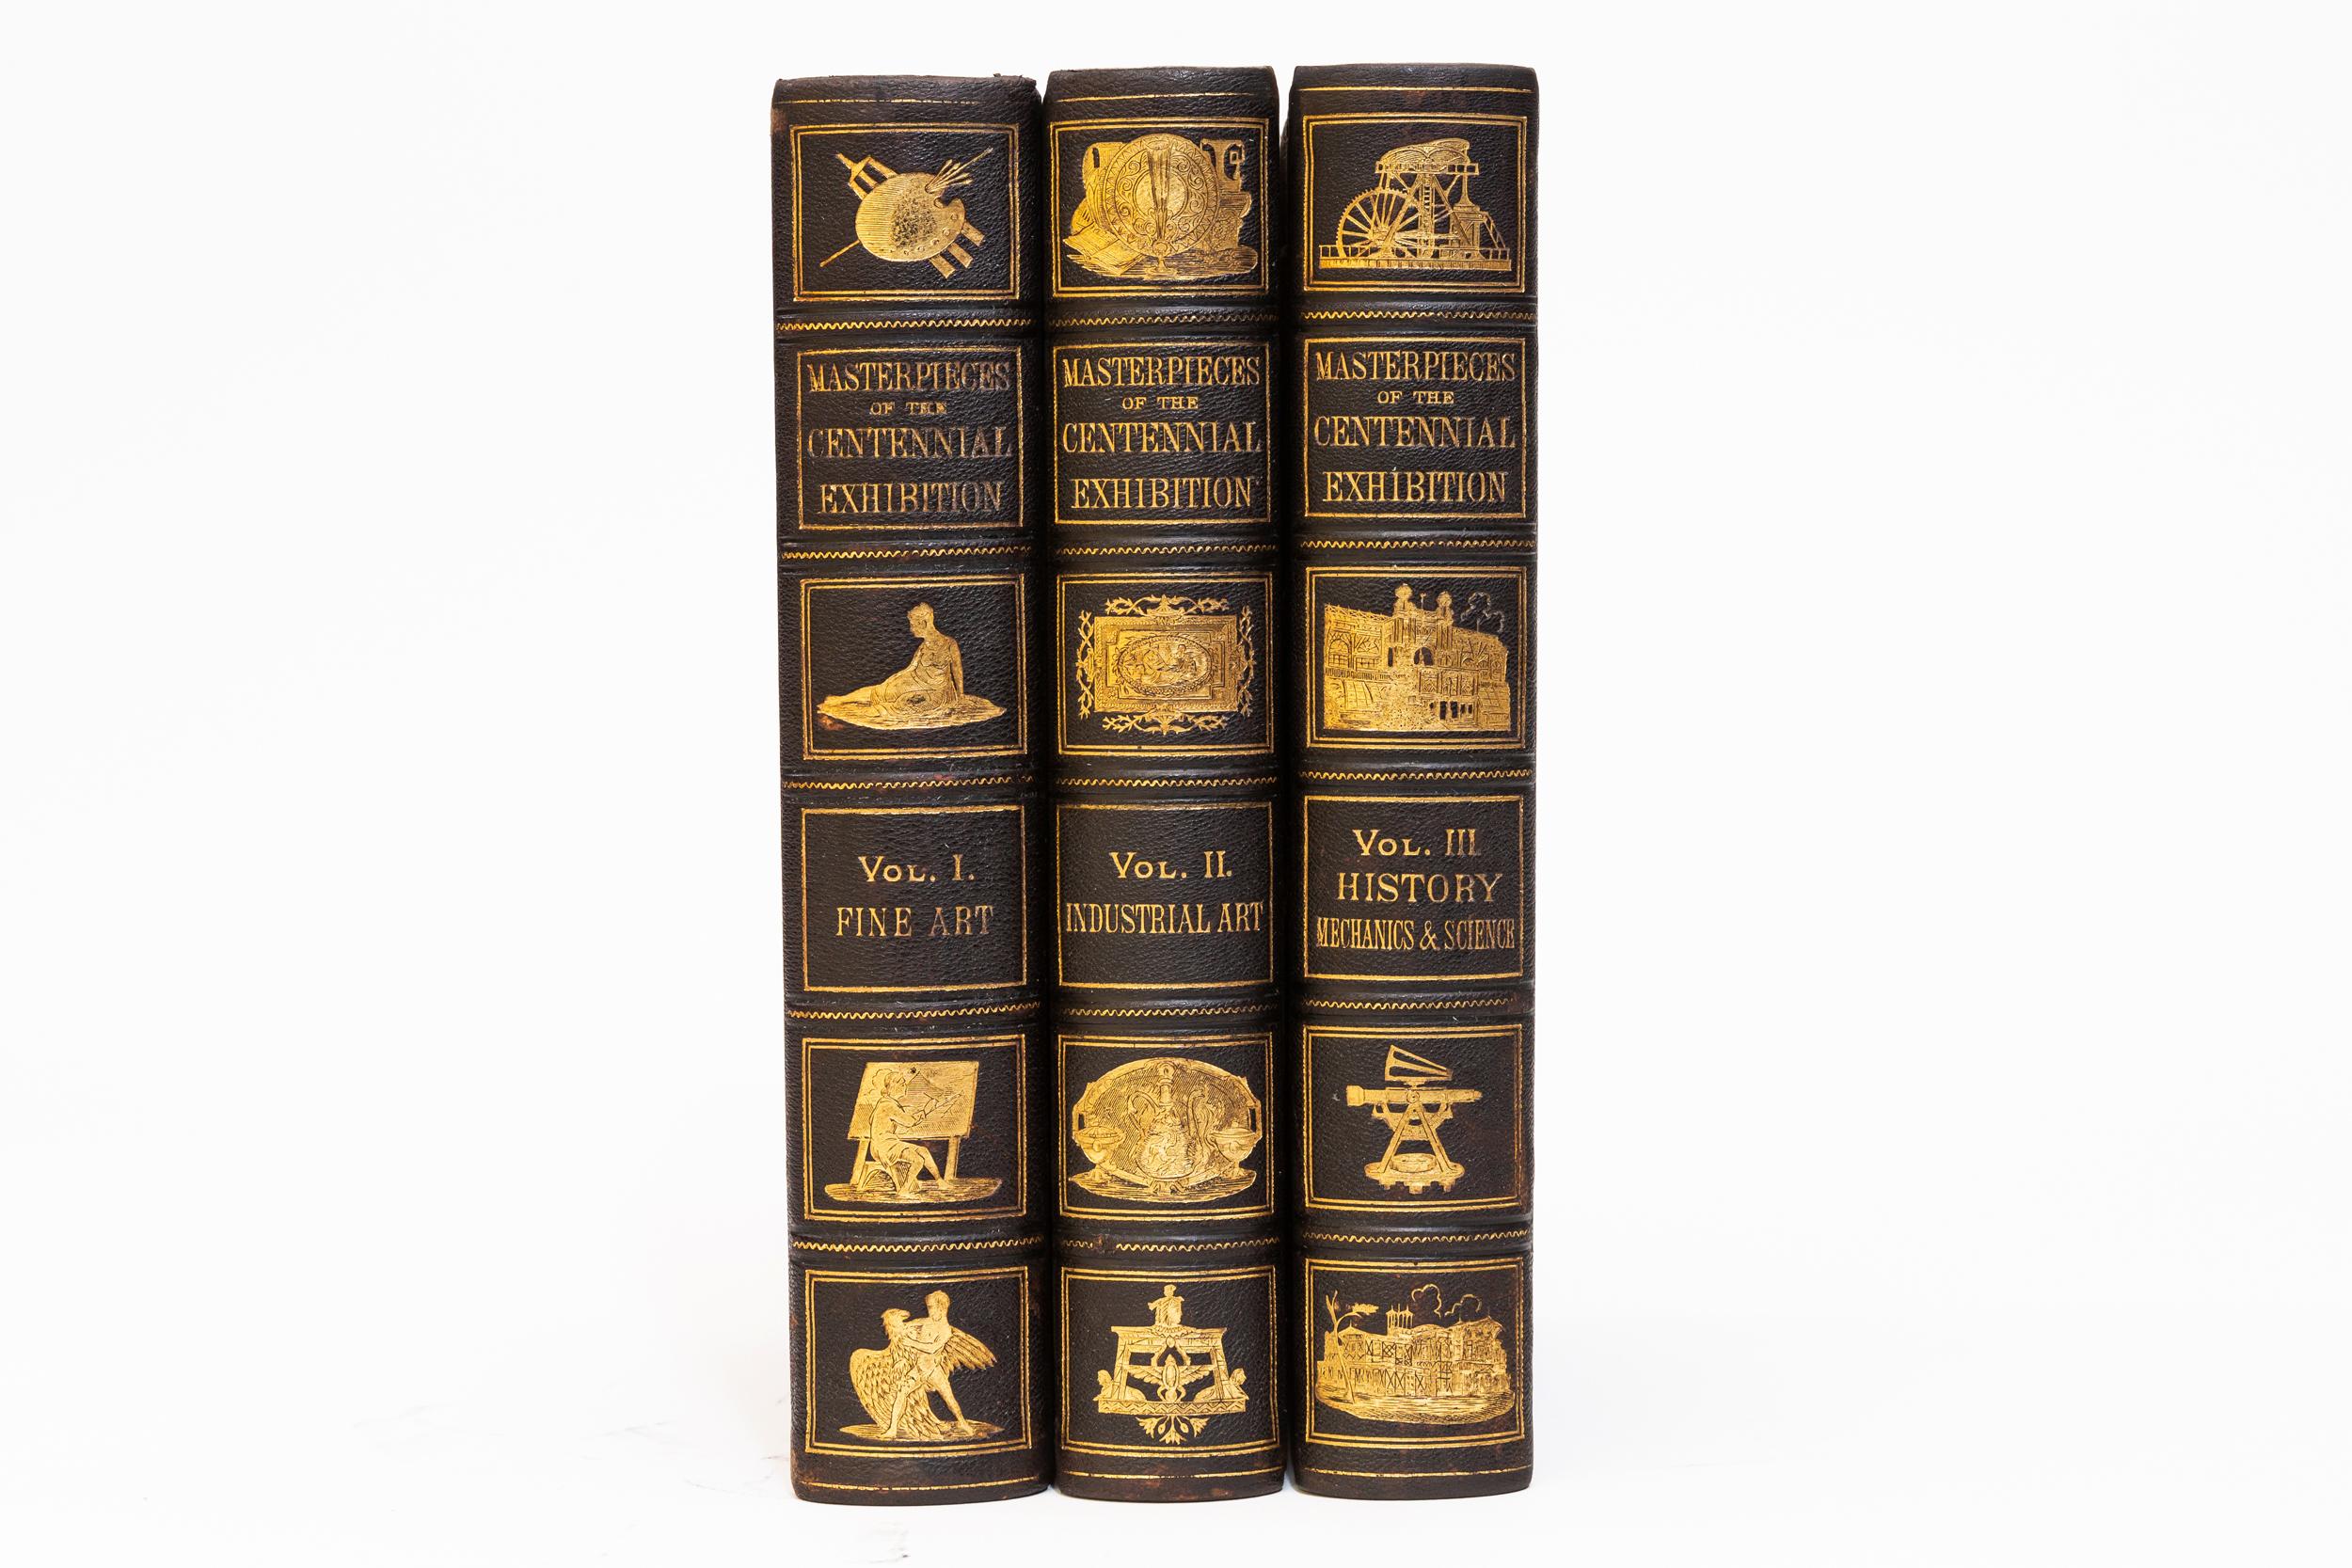 3 Volumes. Edward Strahan, The Masterpieces of the Centennial International Exhibition. Bound in 3/4 black morocco. Decorative boards with gilt-tooled title on covers. All edges marbled. Raised bands. Decorative gilt symbols on spines. Marbled